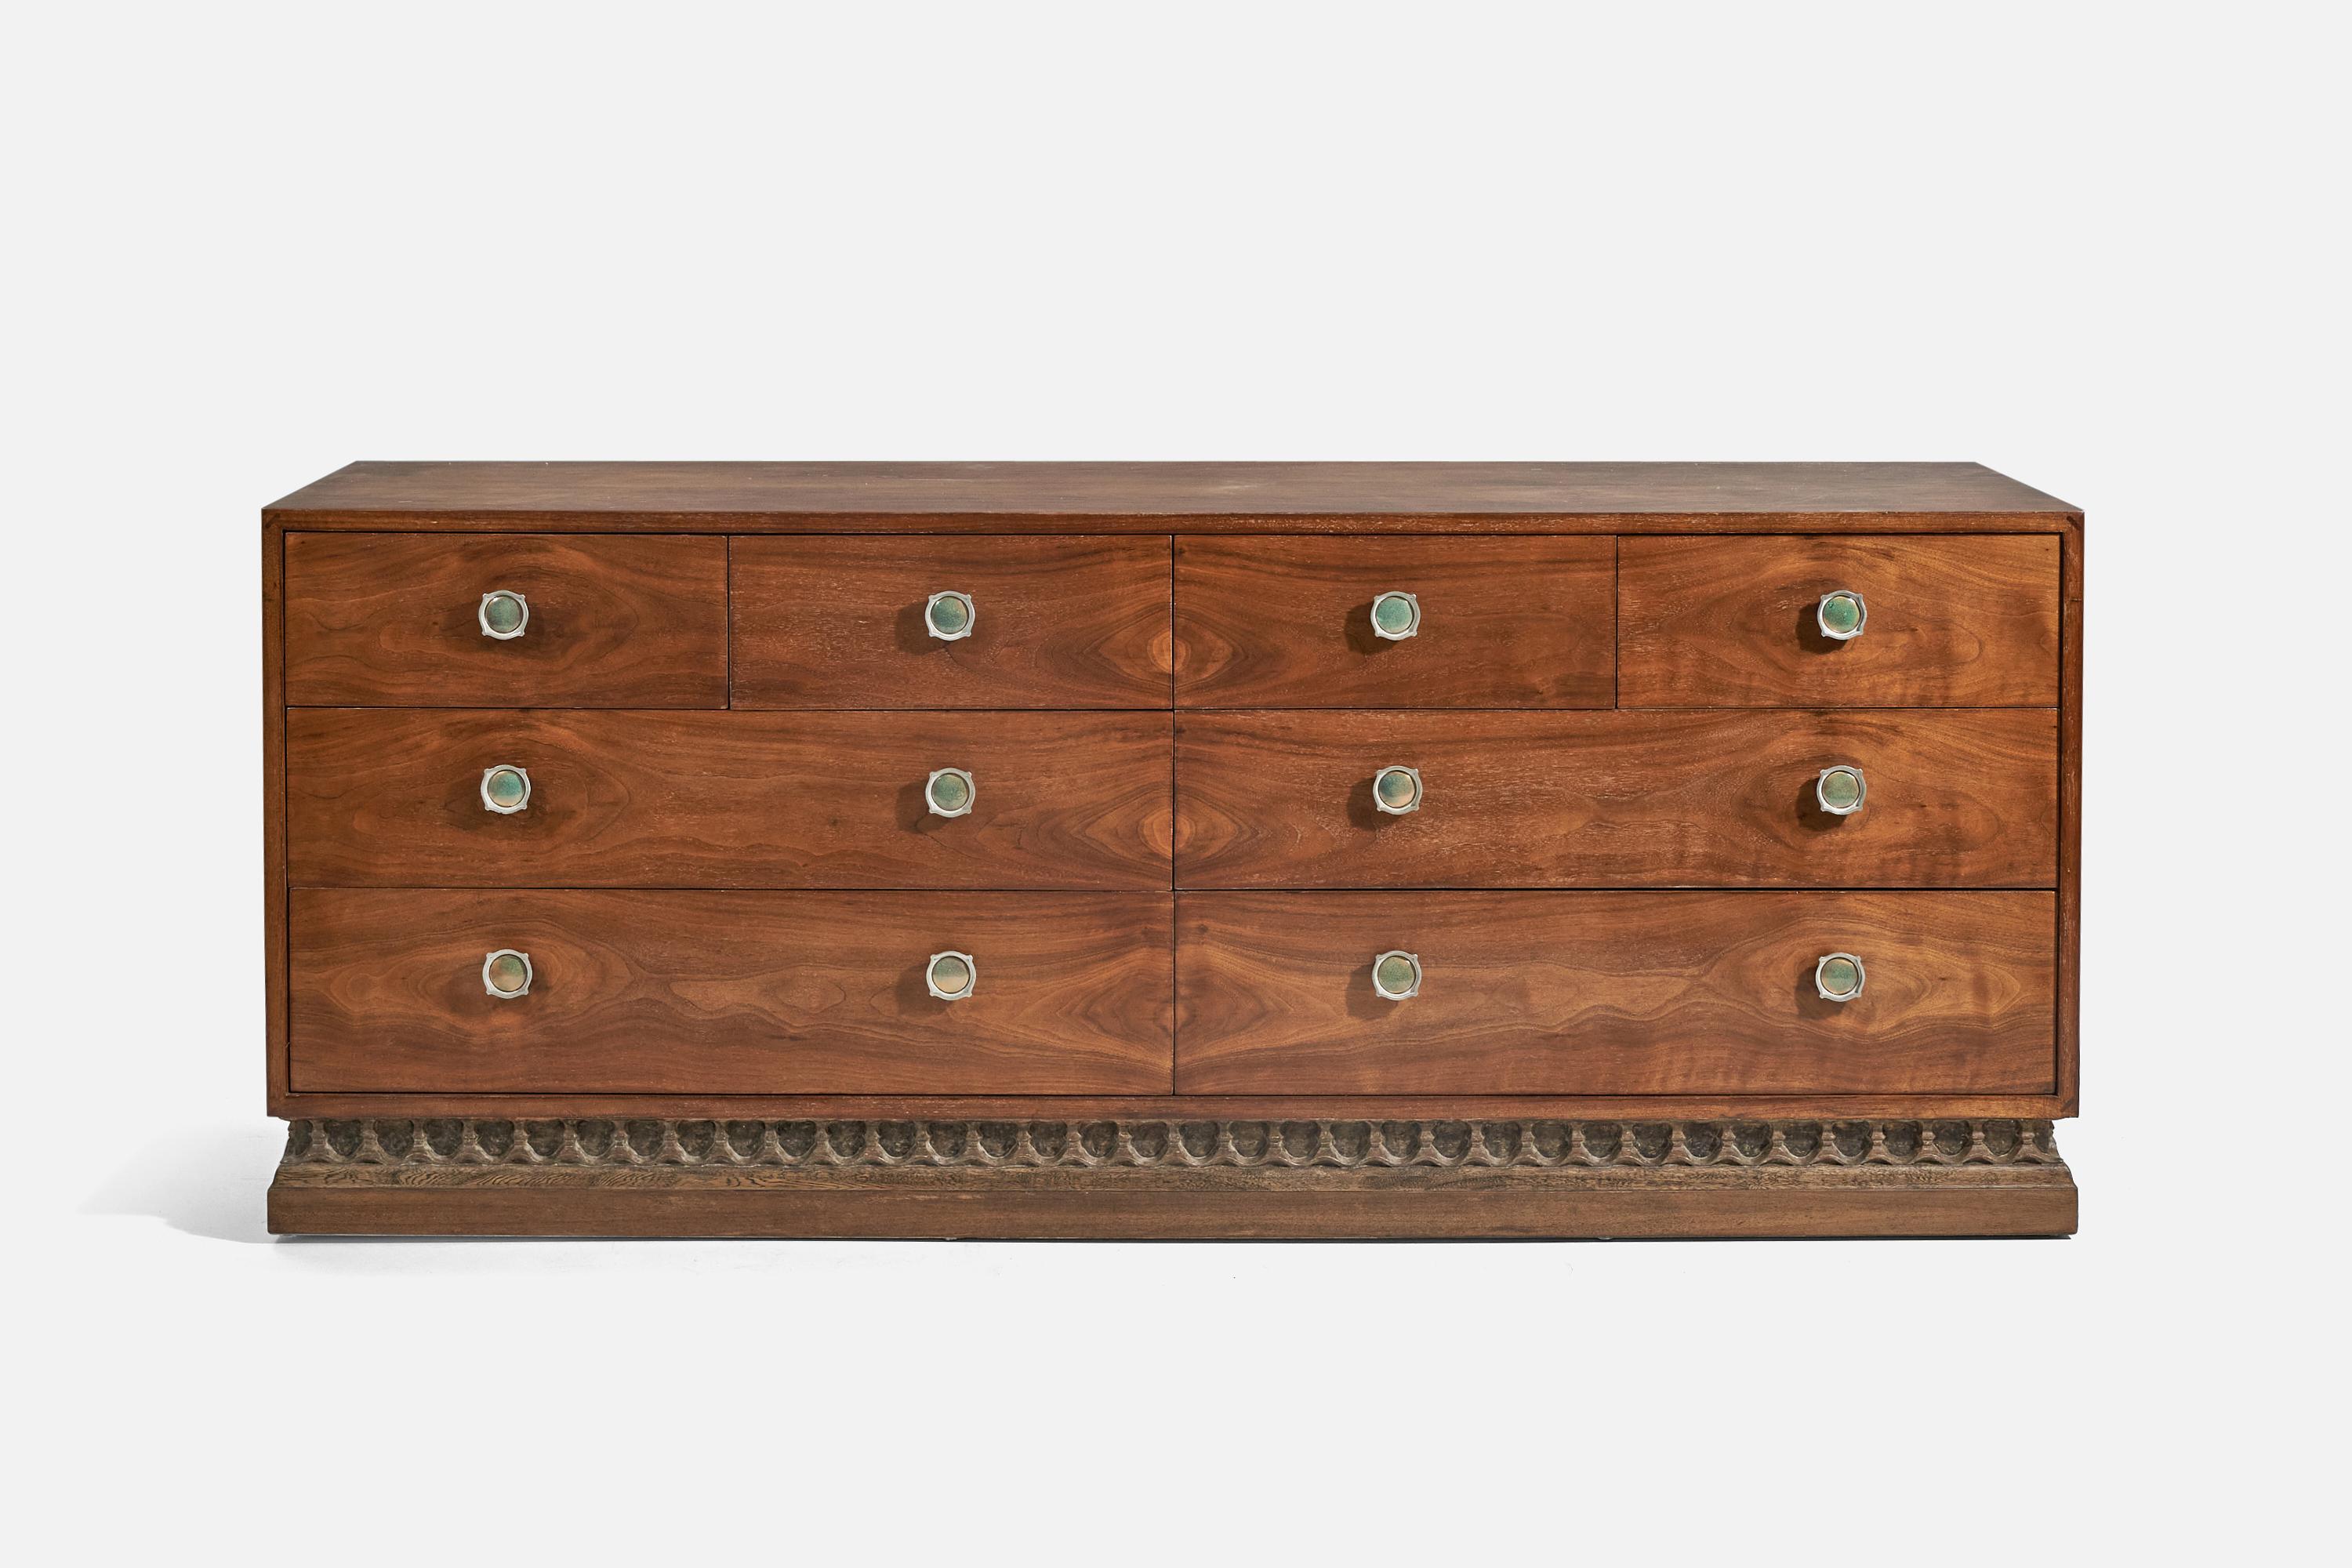 A walnut, brass and enamel dresser designed and produced by an American designer, 1940s.
 